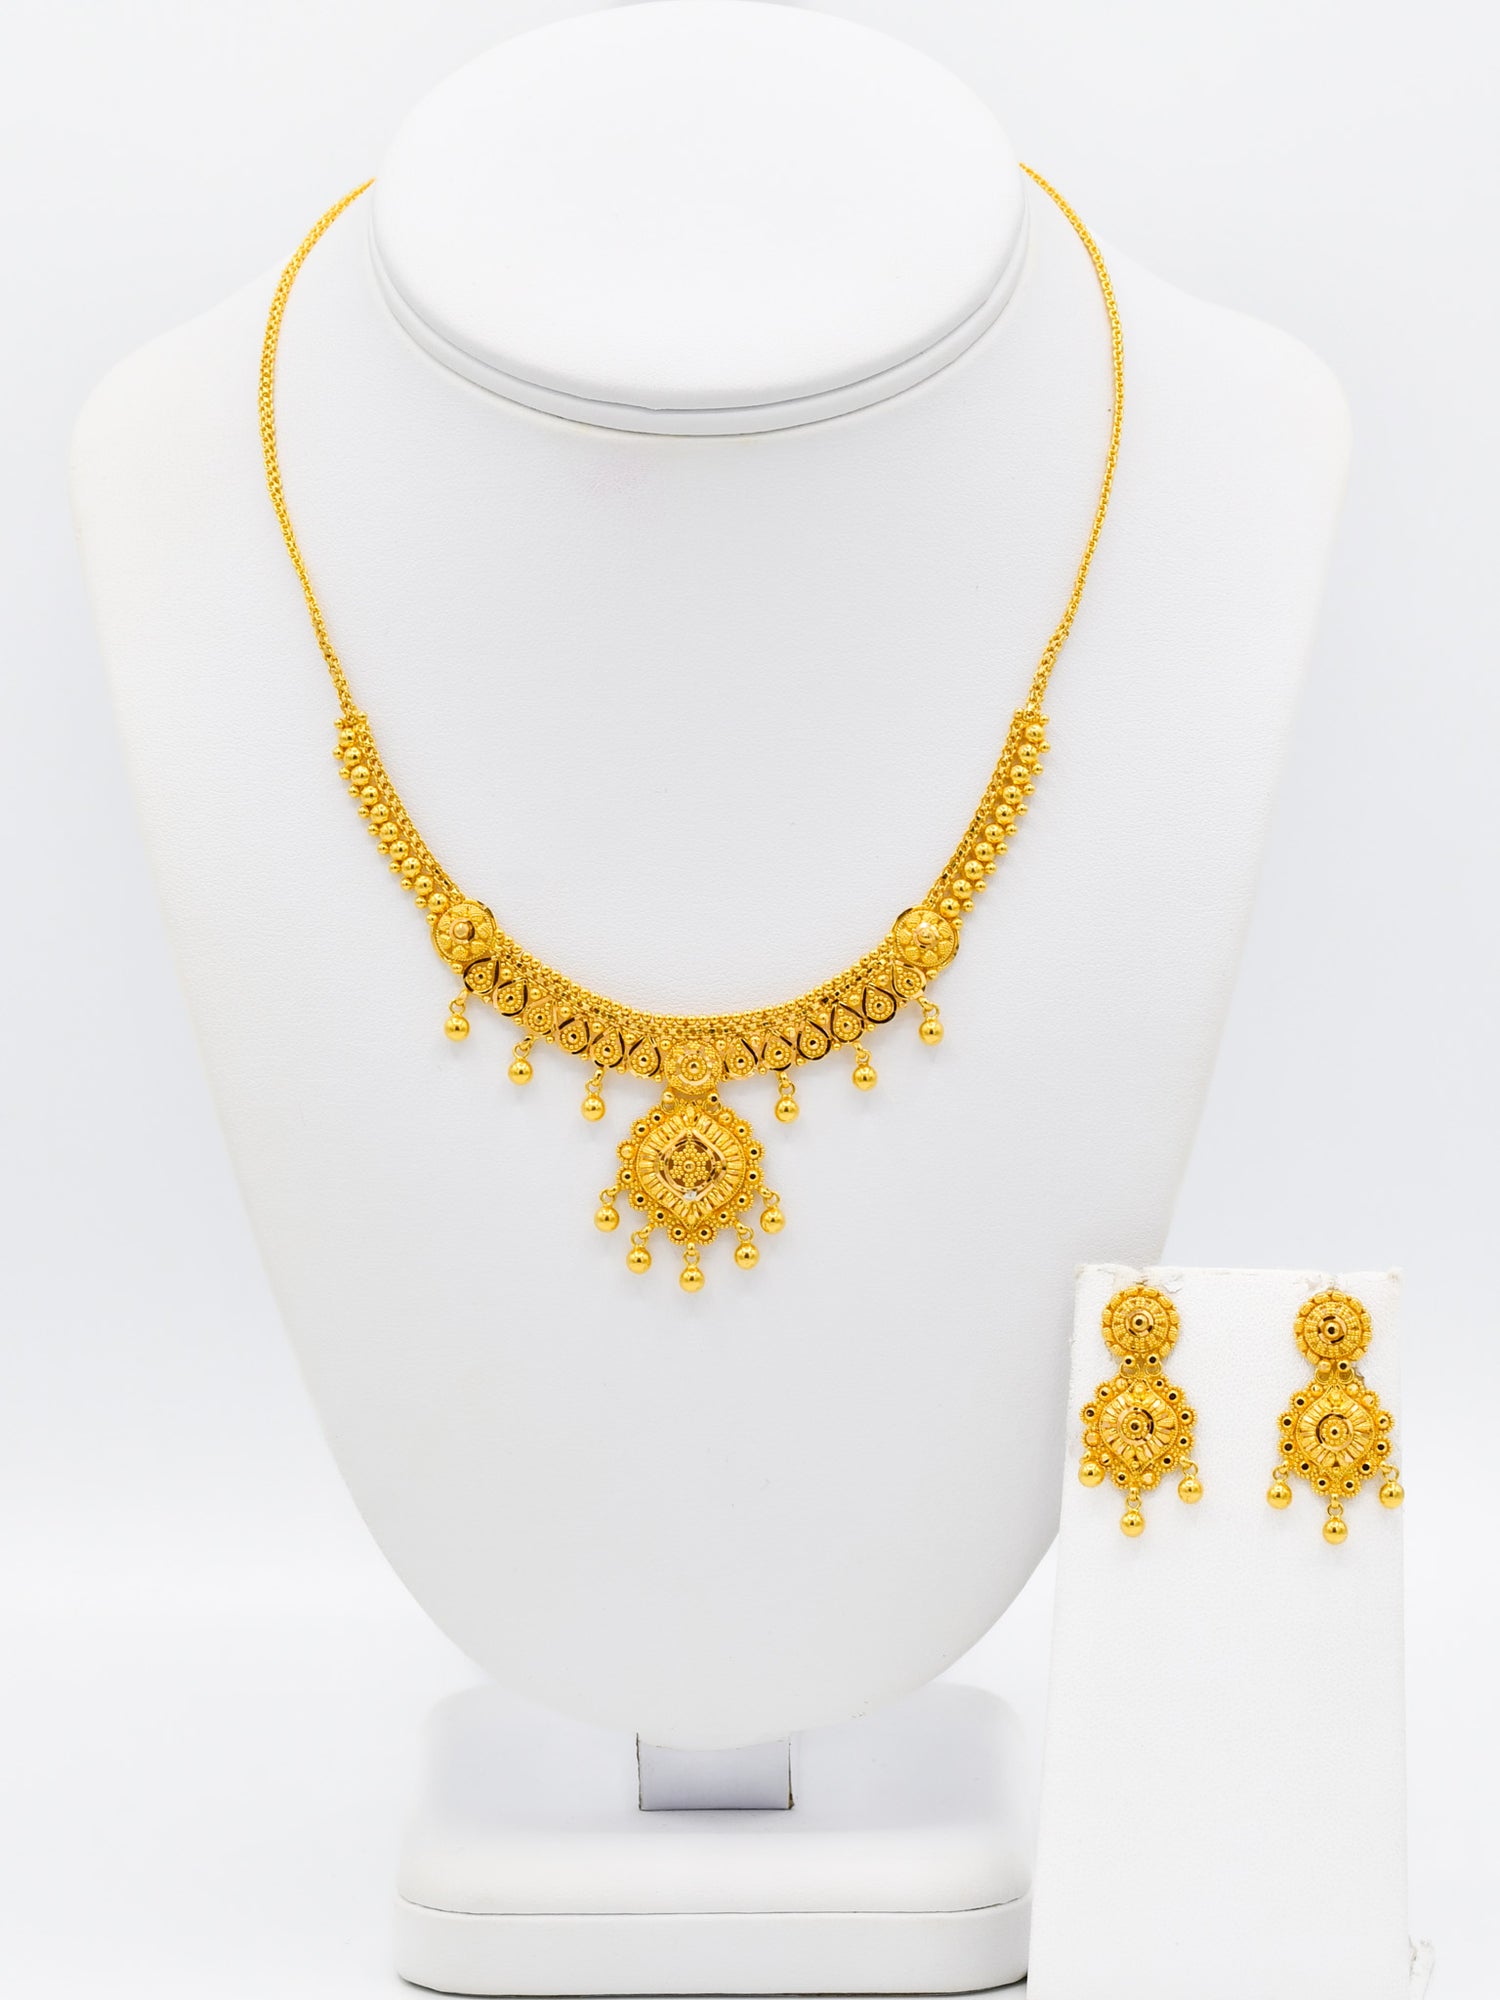 22ct Gold Necklace Set - Roop Darshan